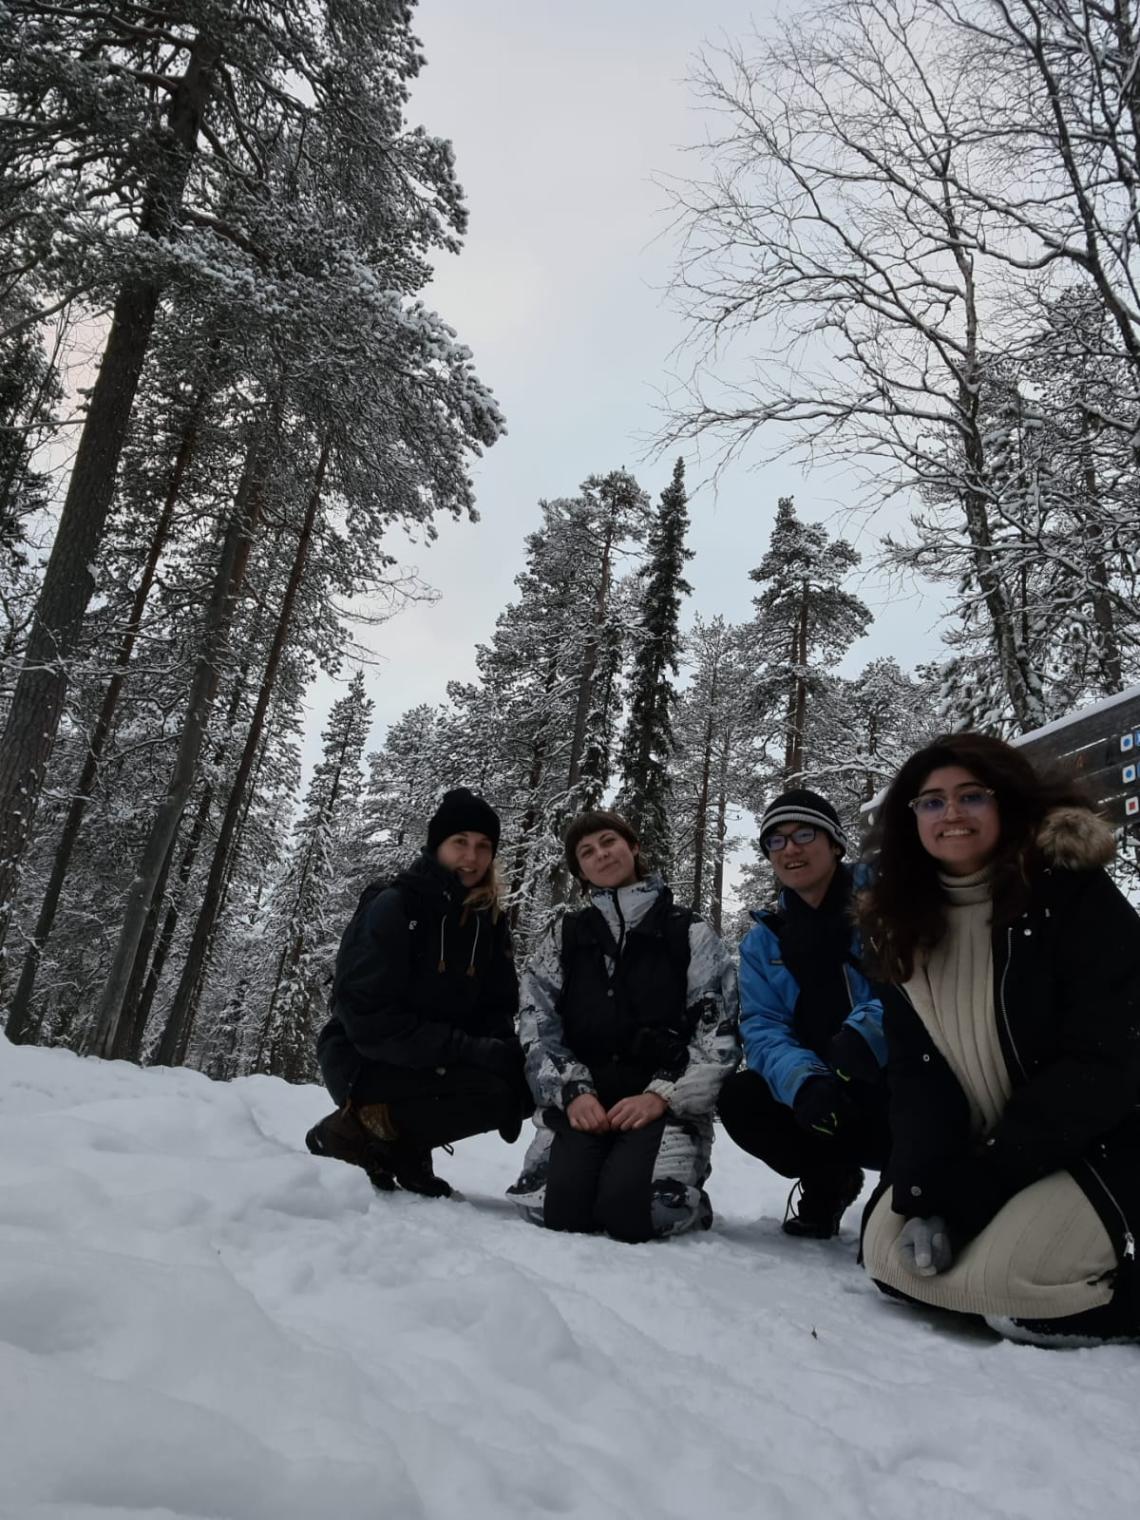 Group photo in a snowy forest